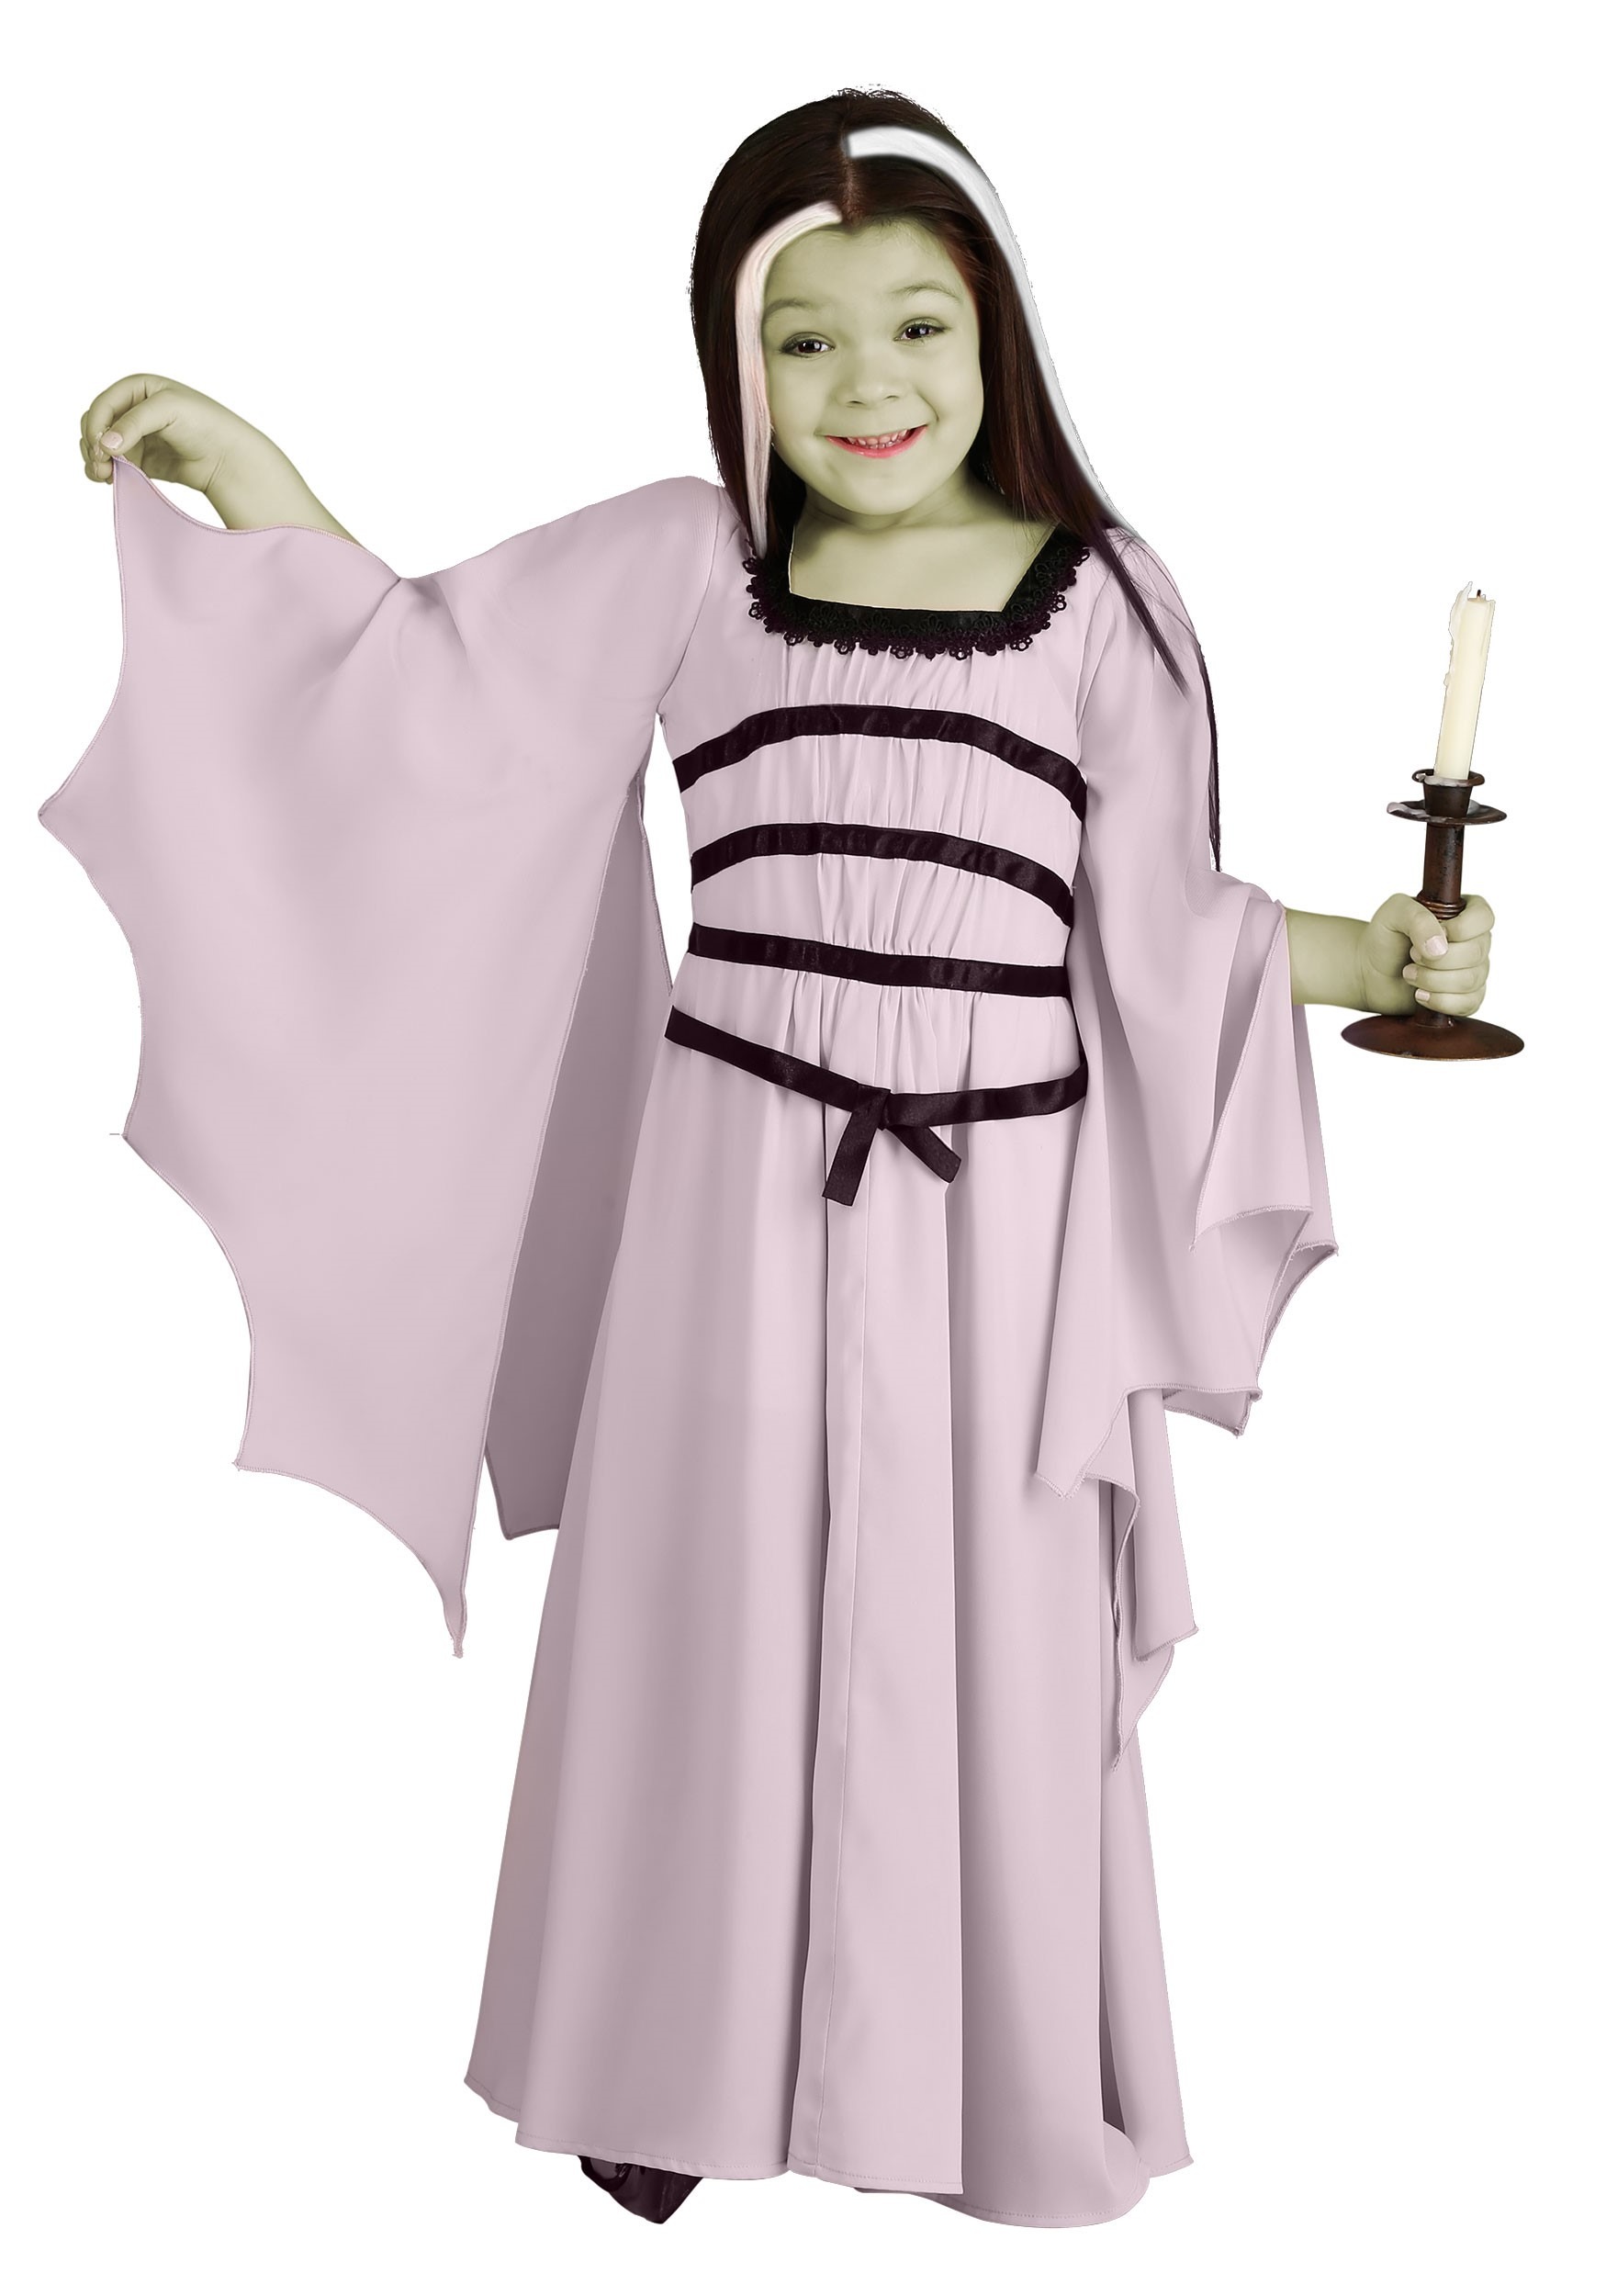 Photos - Fancy Dress Toddler FUN Costumes  Lily The Munsters Costume Black/Purple FUN0810TD 